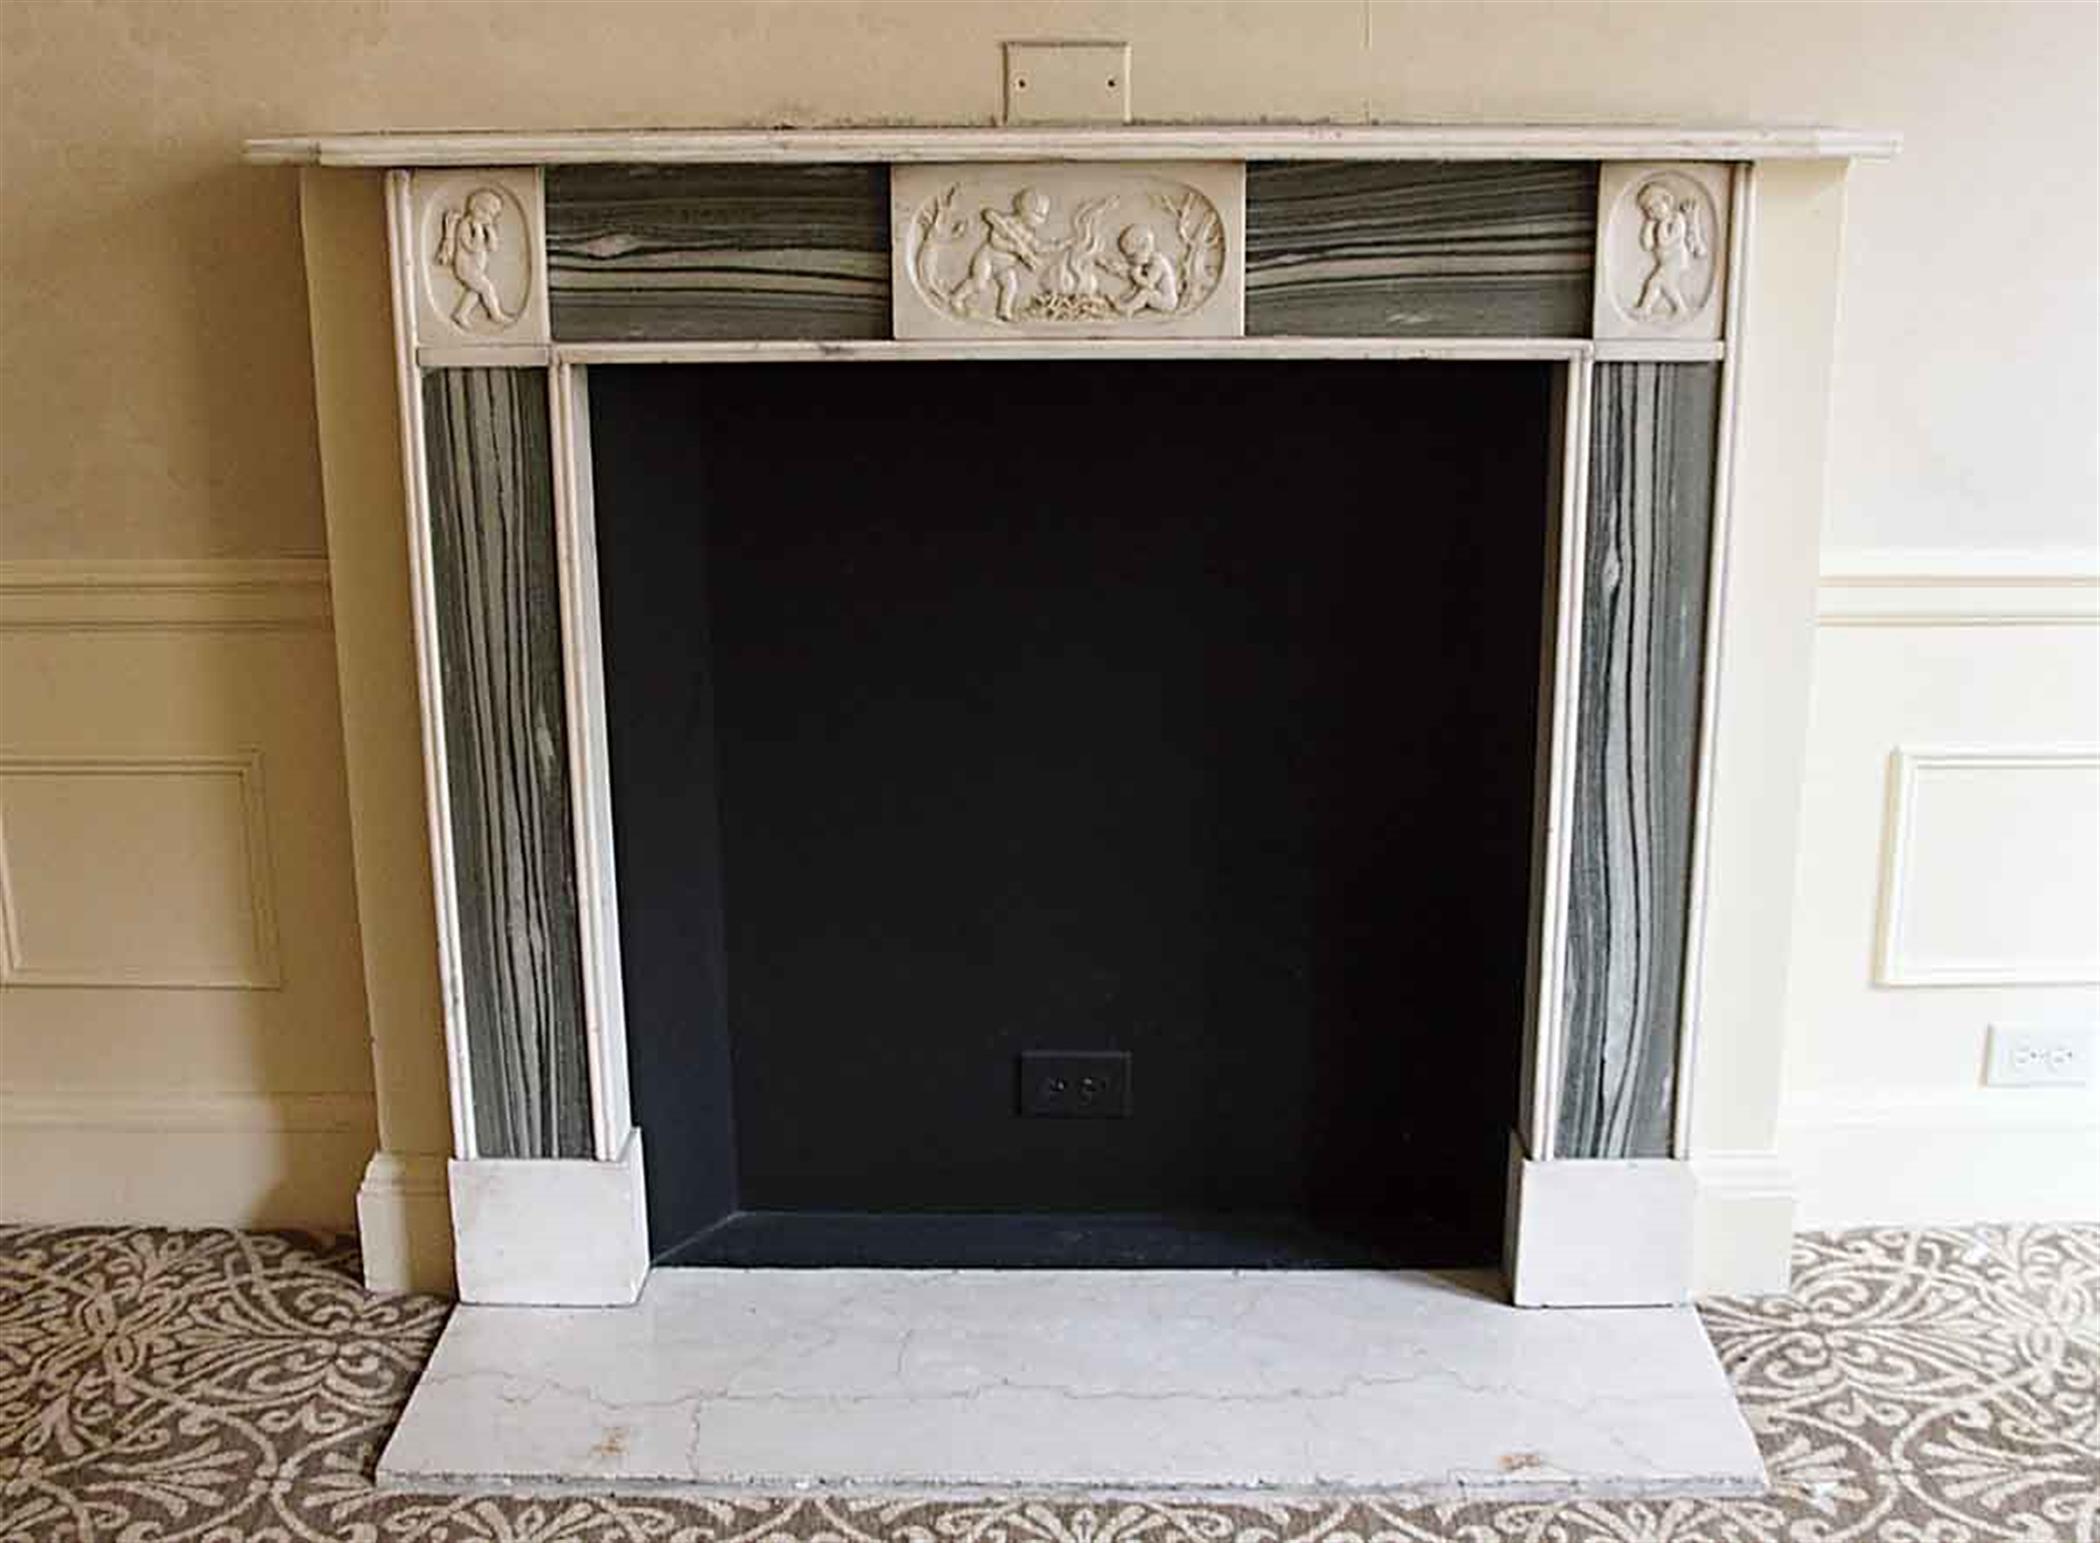 English Regency green and white marble mantel with cherubic motifs. This mantel was one of a group of antique mantels imported from Europe and installed in the NYC Waldorf Astoria Hotel in 1931 when the hotel was first built on Park Avenue. This